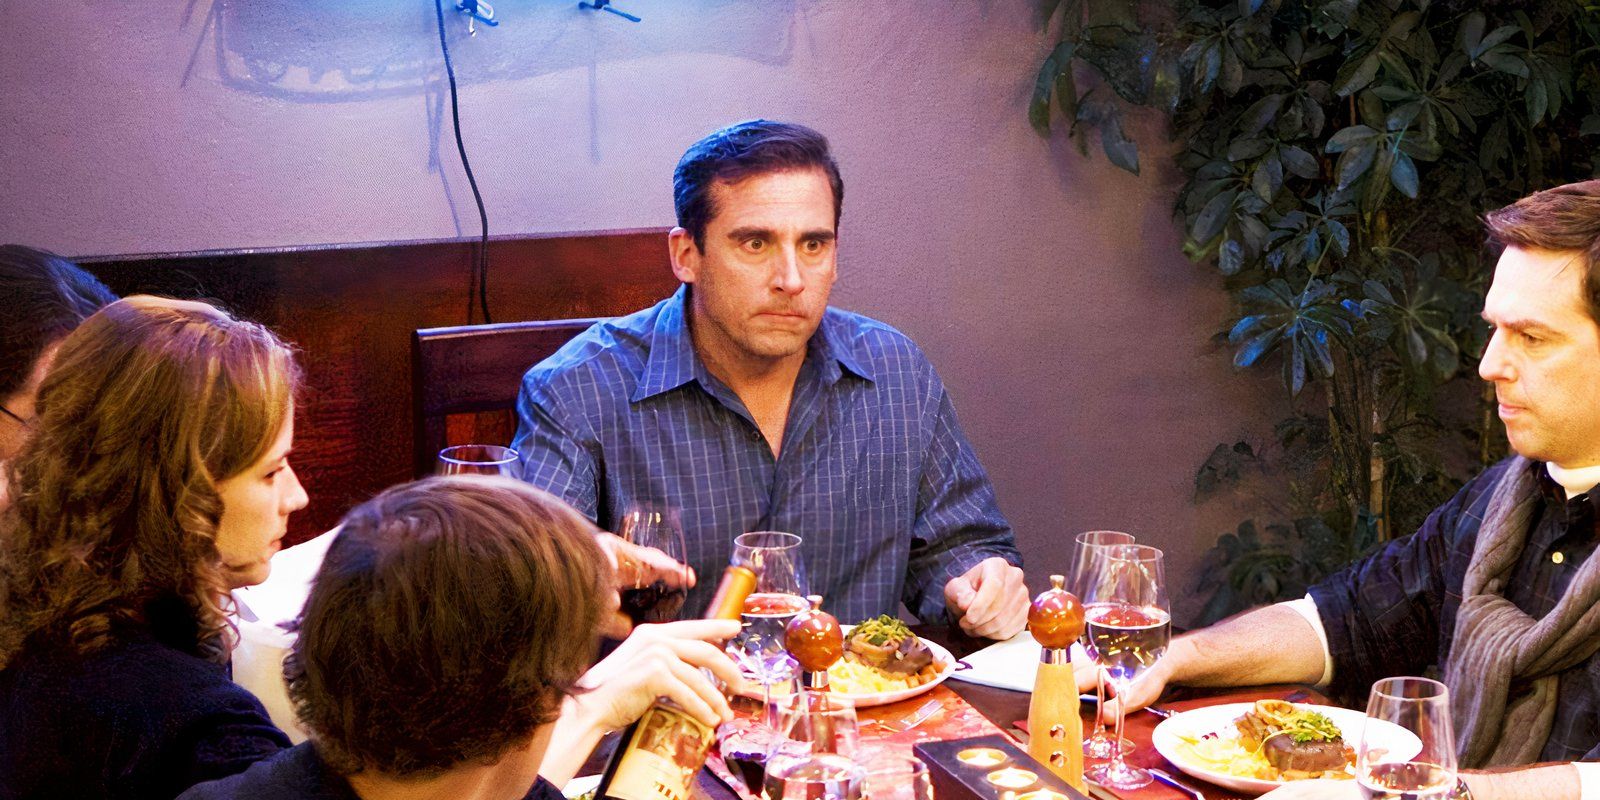 Steven Carell as Michael with a large neon sign behind him in The Office's Dinner Party episode